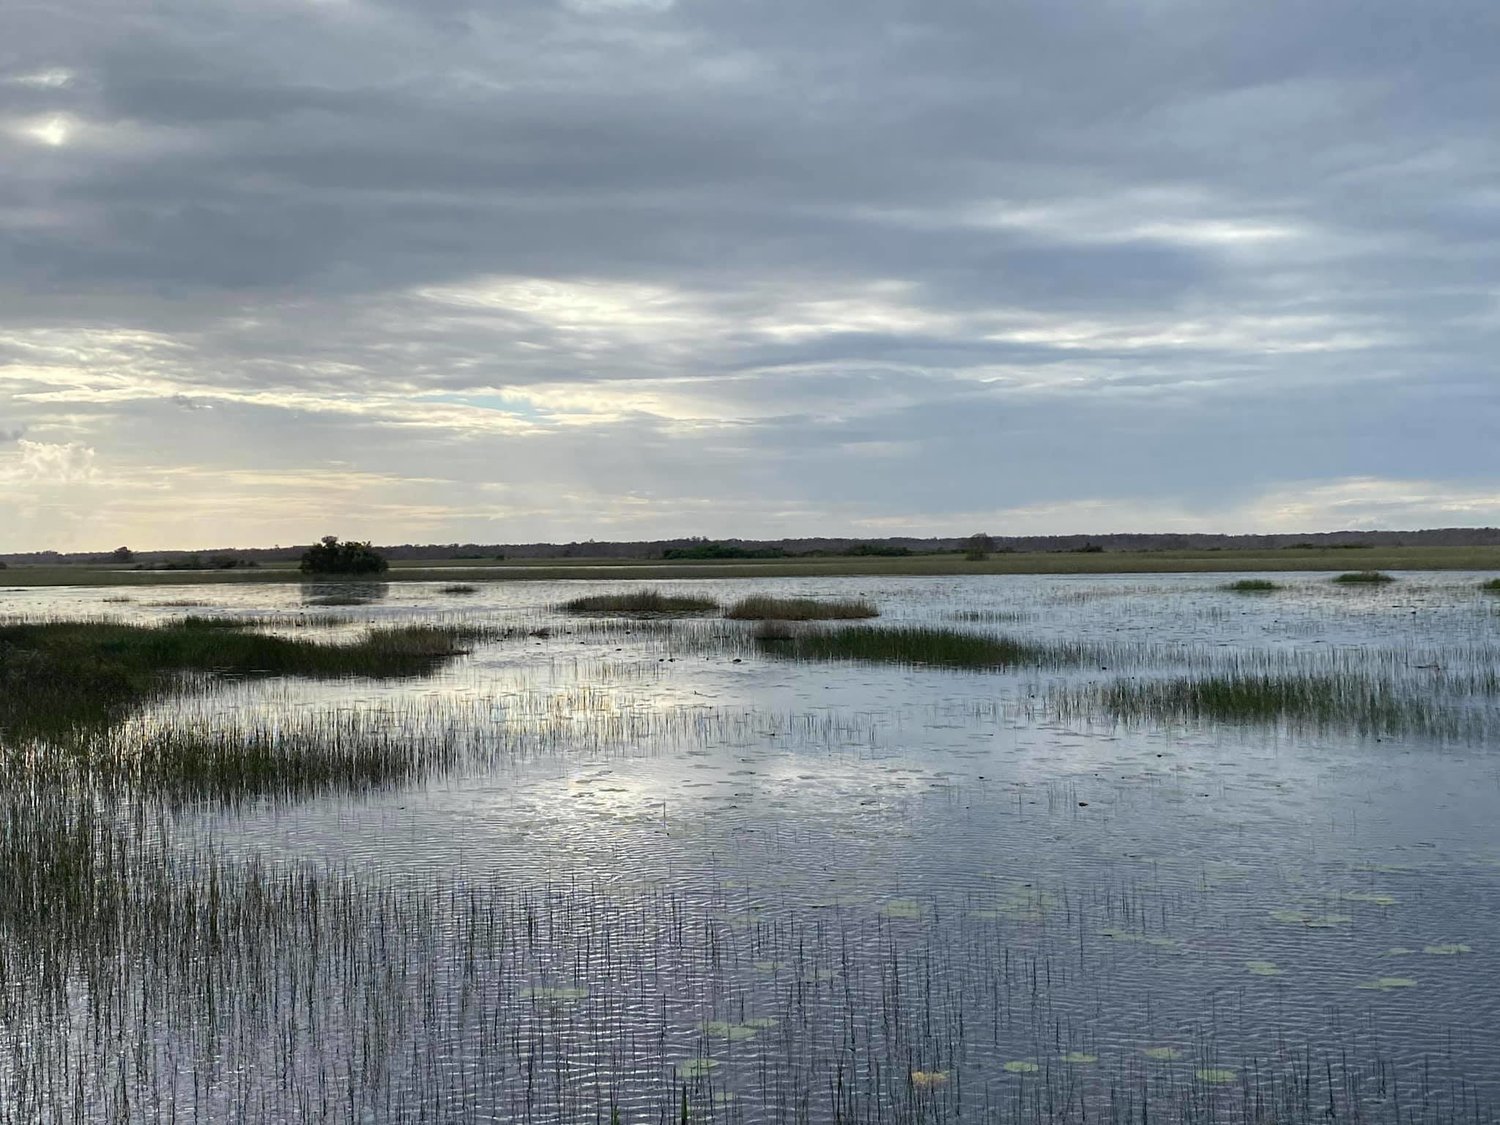 “I felt like I was driving on a lake, not tribal lands,” reported Betty Osceola of the Miccosukee Tribe as she toured the tribal lands in the Everglades after Tropical Storm Eta.